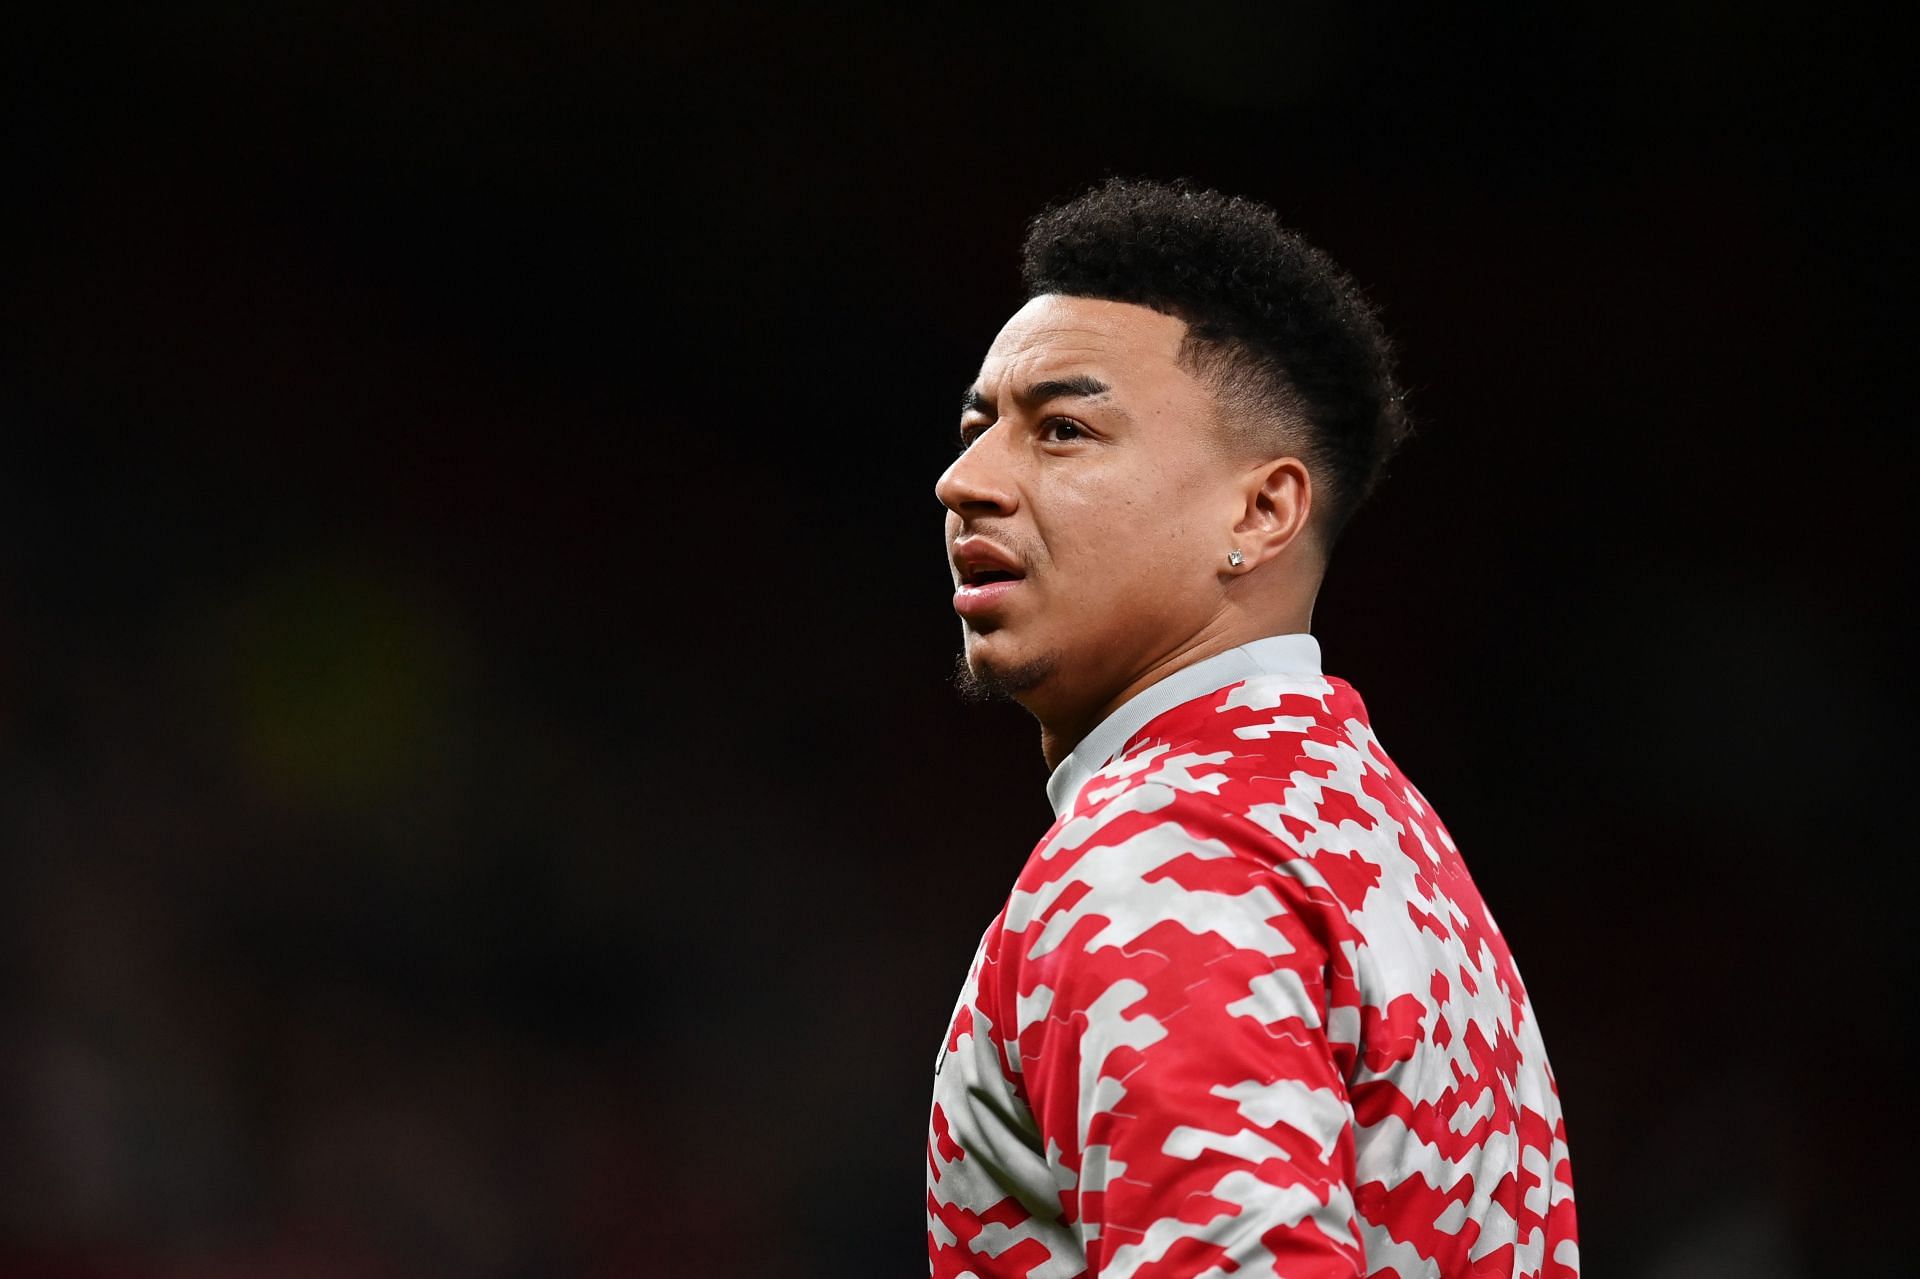 Manchester United have rejected an offer from Newcastle United to take Jesse Lingard on loan.